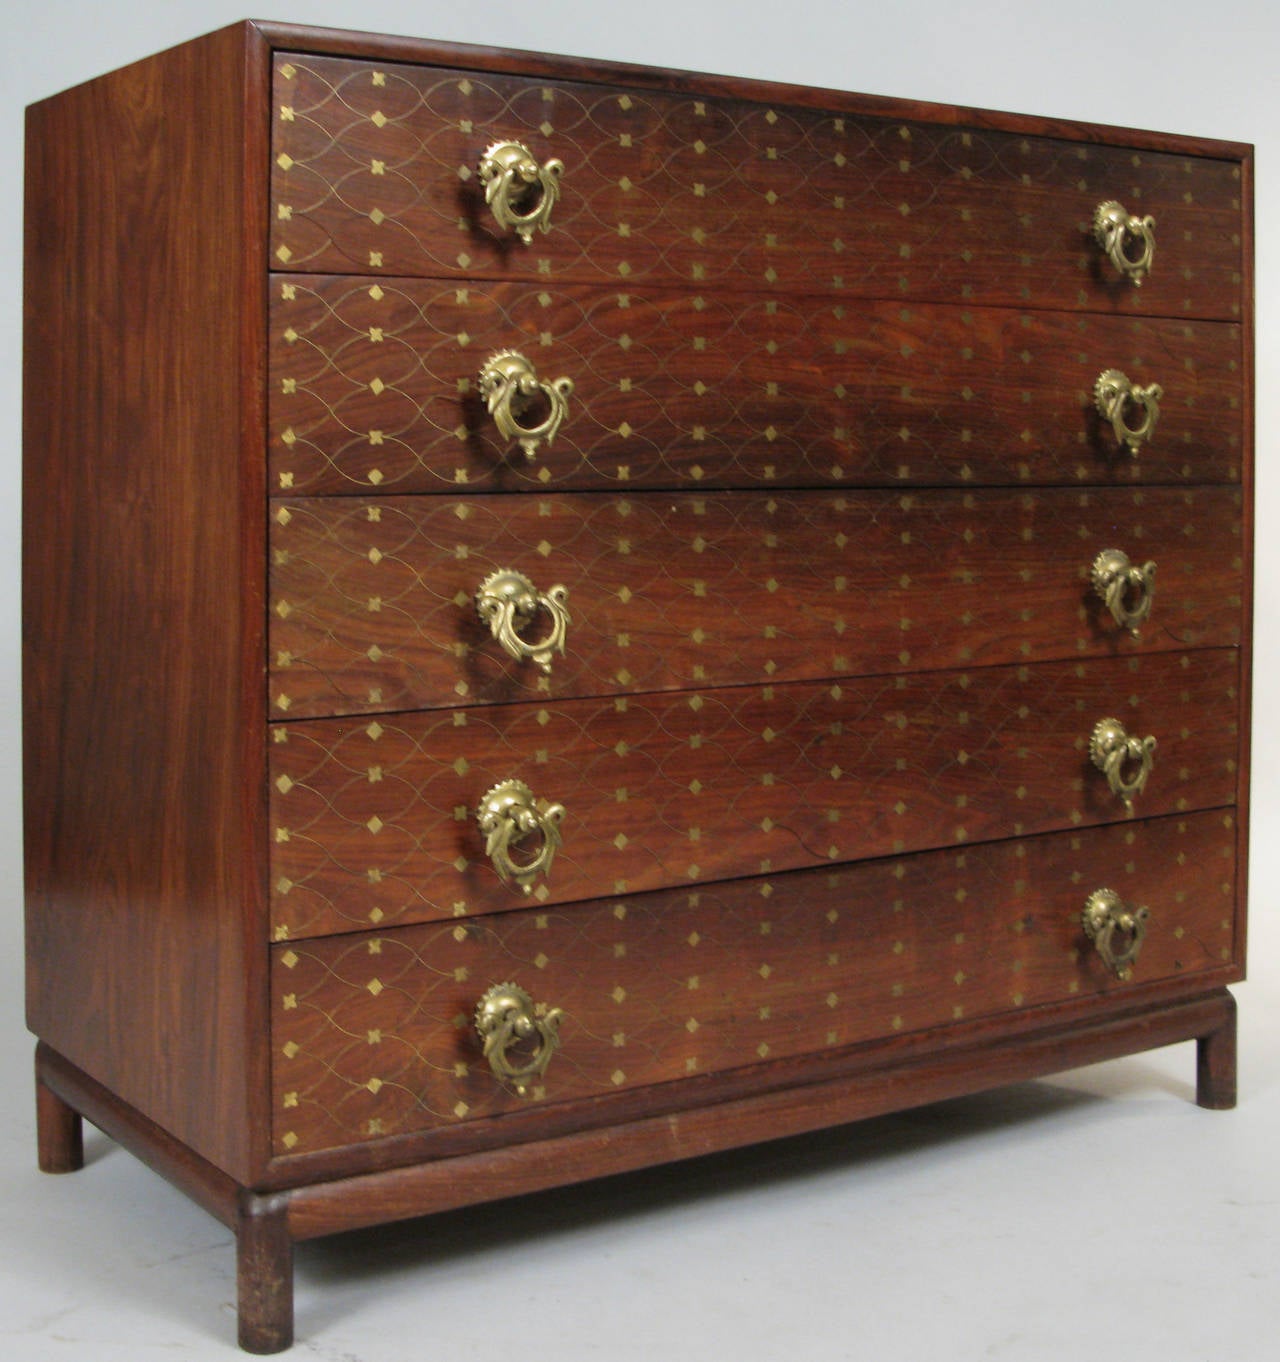 An outstanding five-drawer chest of drawers in solid rosewood, with the most wonderful inlaid brass details on the drawer fronts with a thin crossover pattern in brass, with diamond details also inlaid in brass. Absolutely beautiful details in this